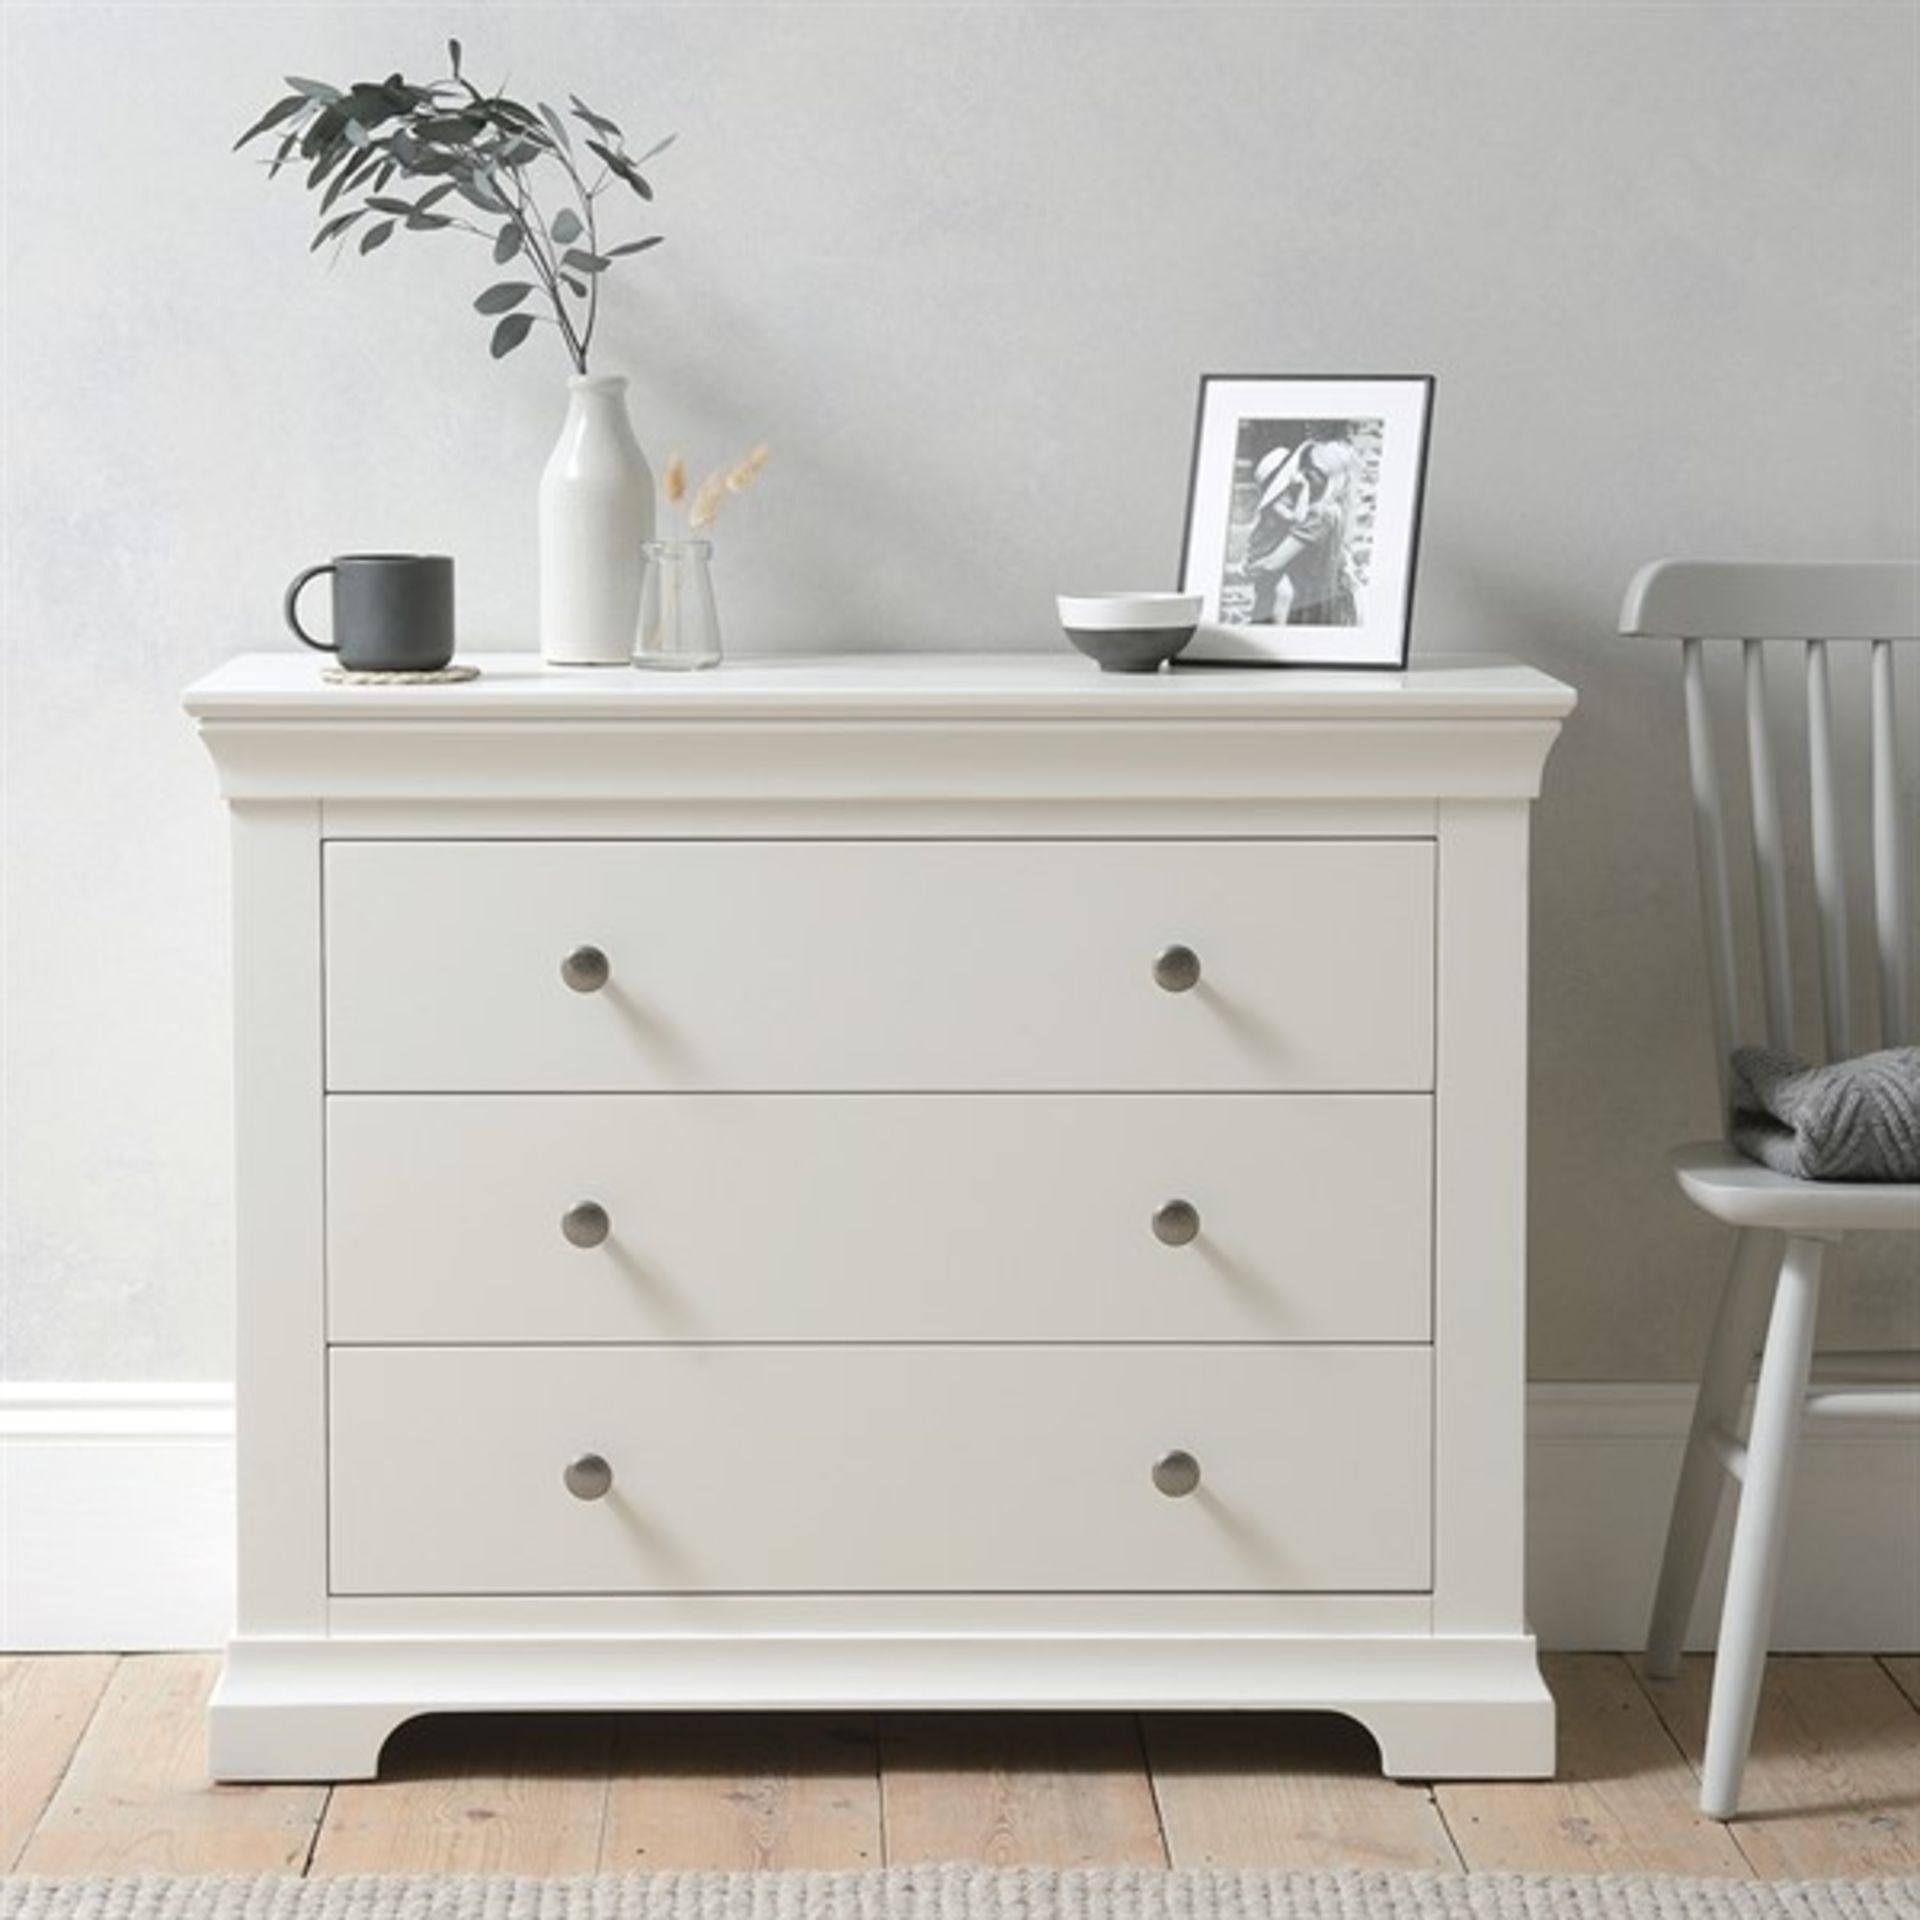 RRP £399 - Cotswold Company Chantilly Warm White 3 Drawer Chest (H)80 x (W) 100 x (D)42cm - BACK HAS